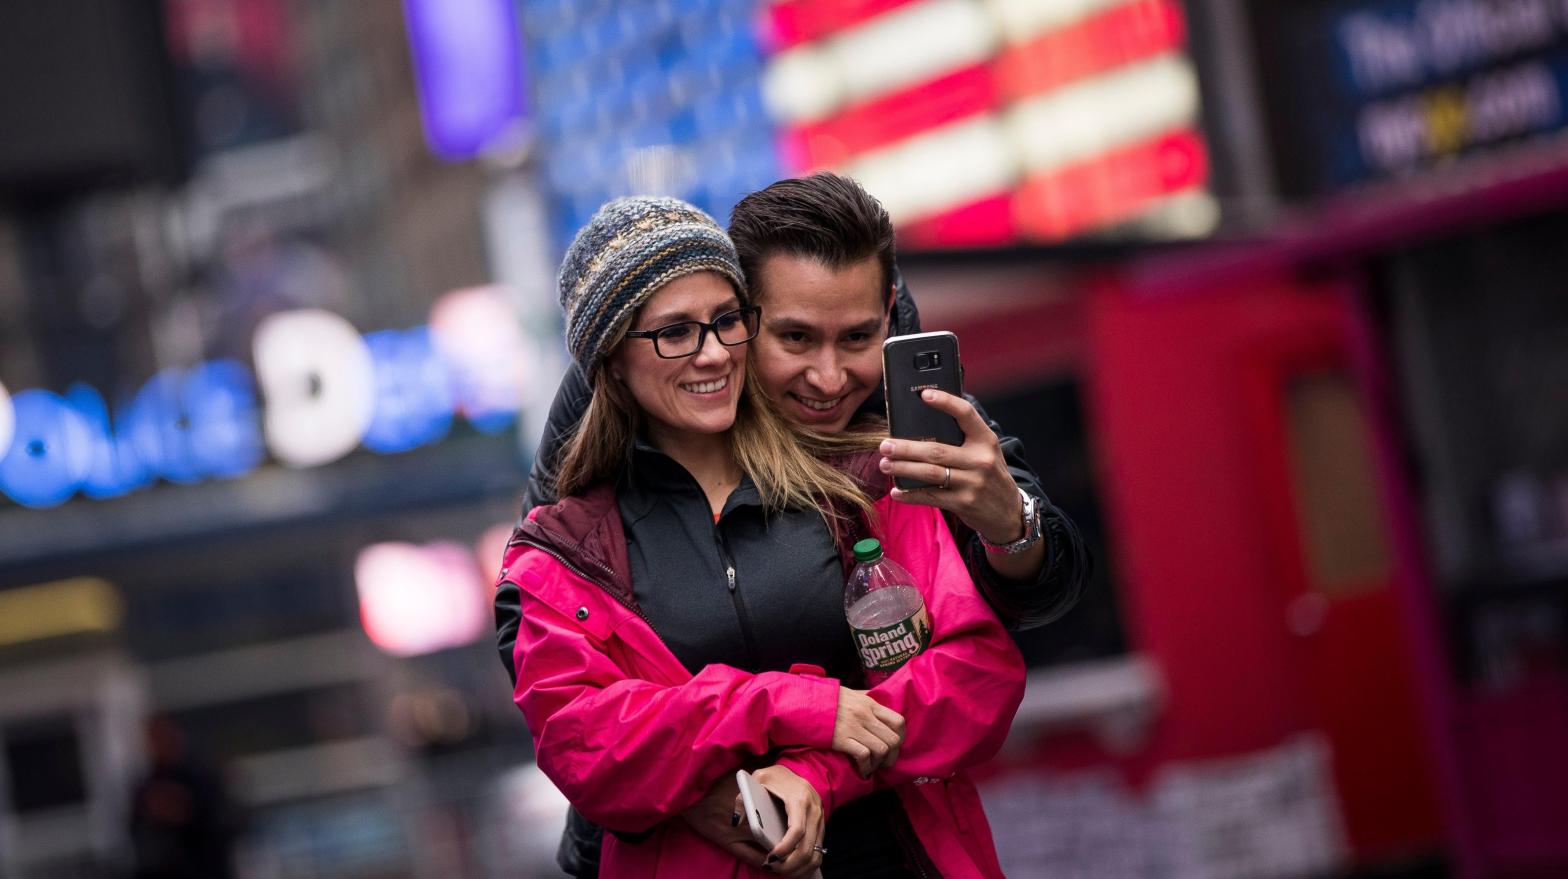 The couple-based app was quietly released in April 2020. (Image: Drew Angerer, Getty Images)